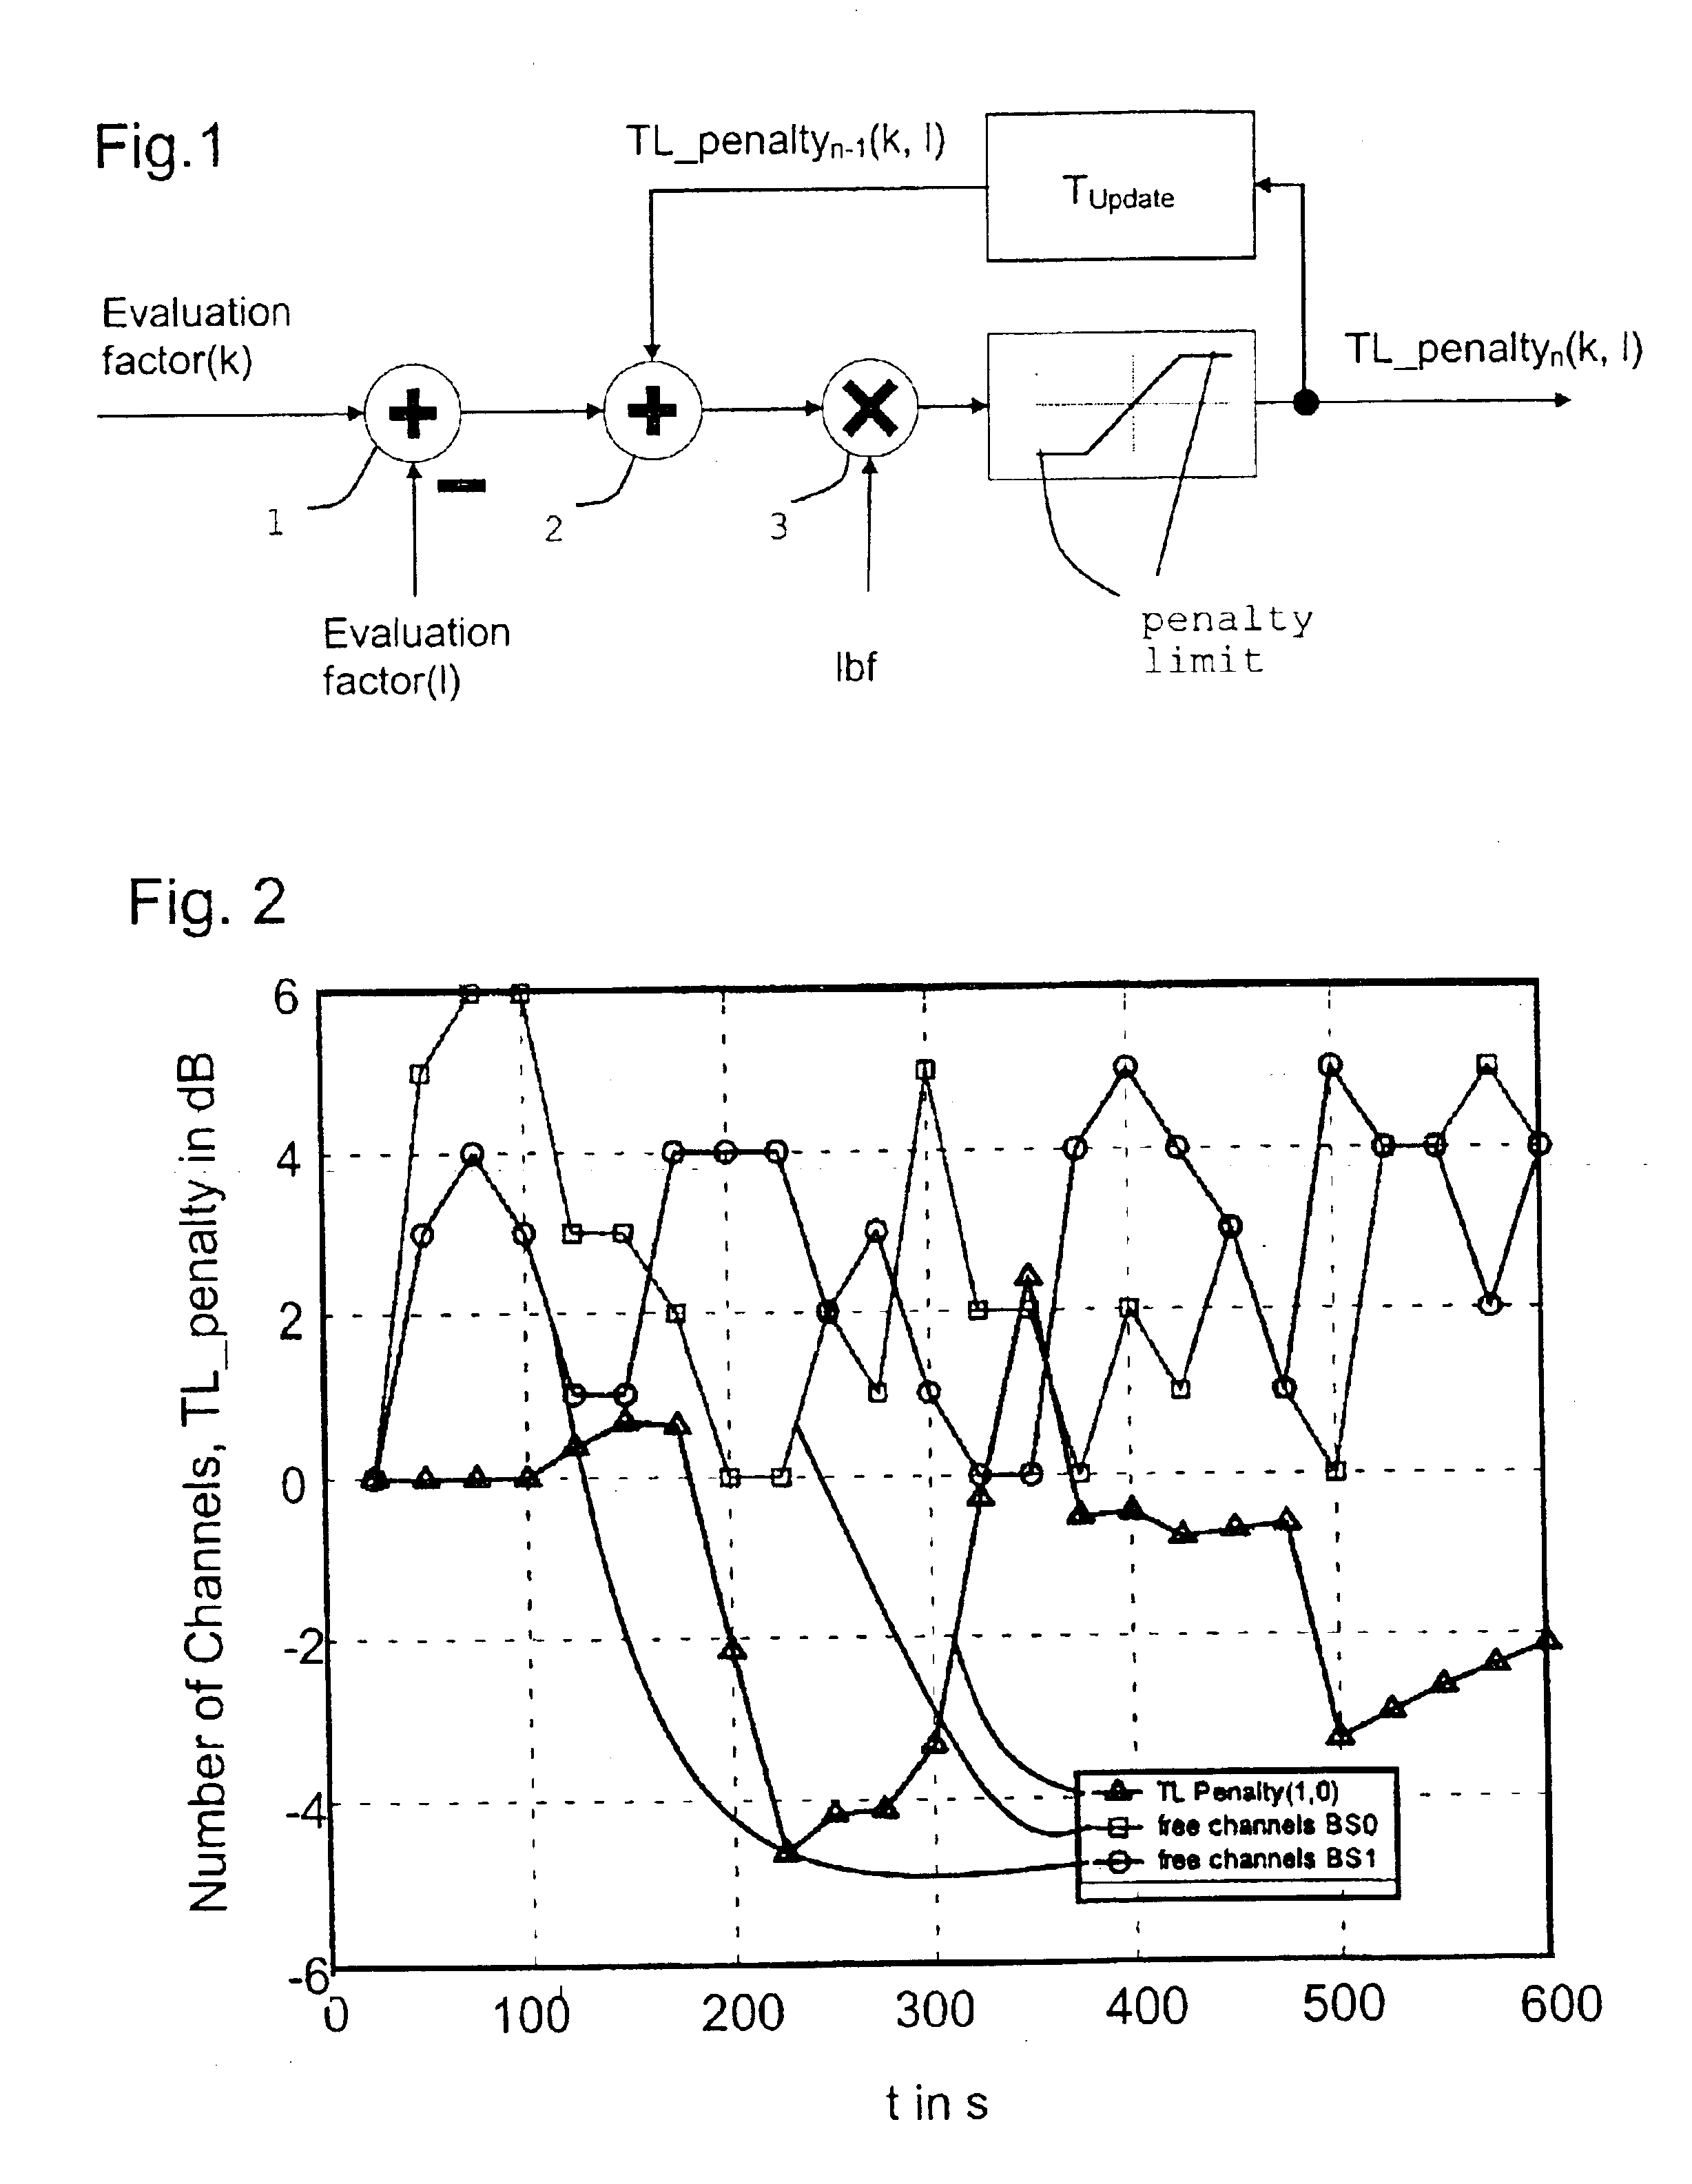 Method for communication traffic load balancing between cells of a communication system